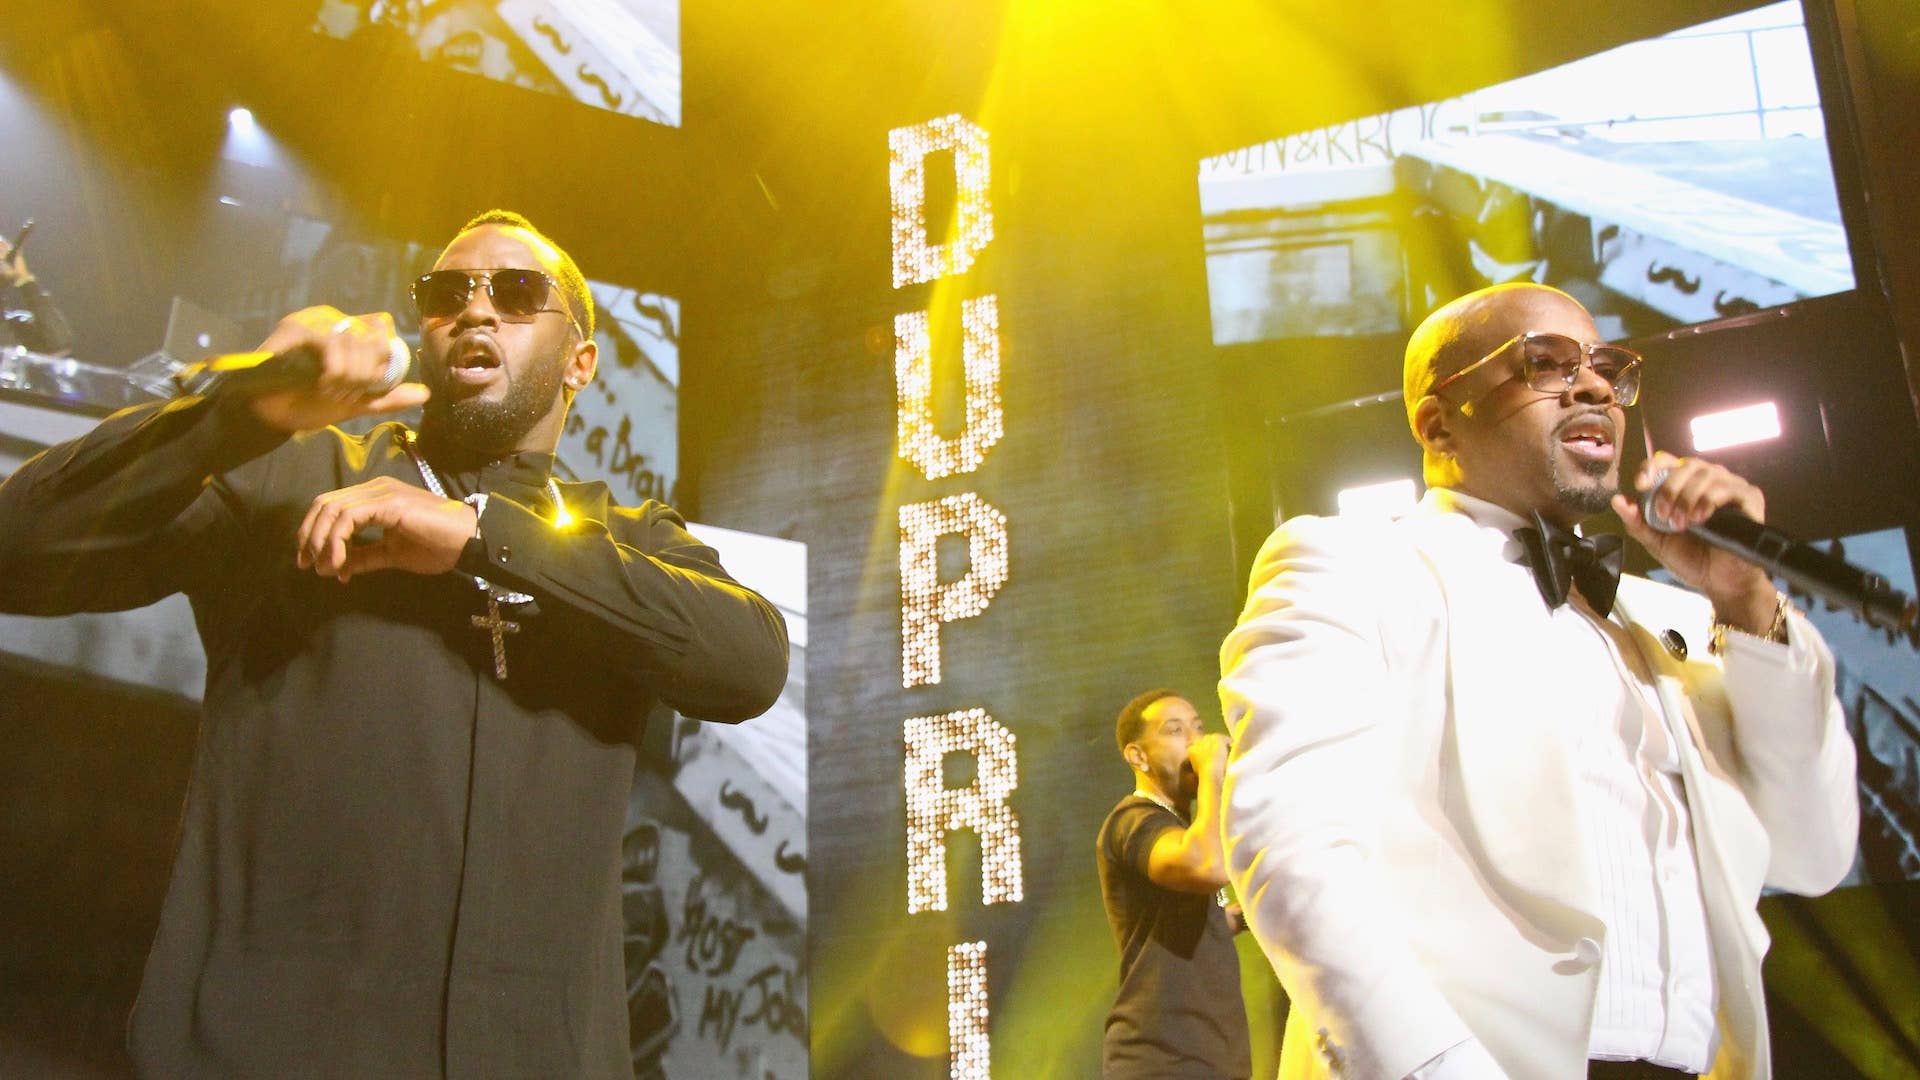 Diddy and Dupri